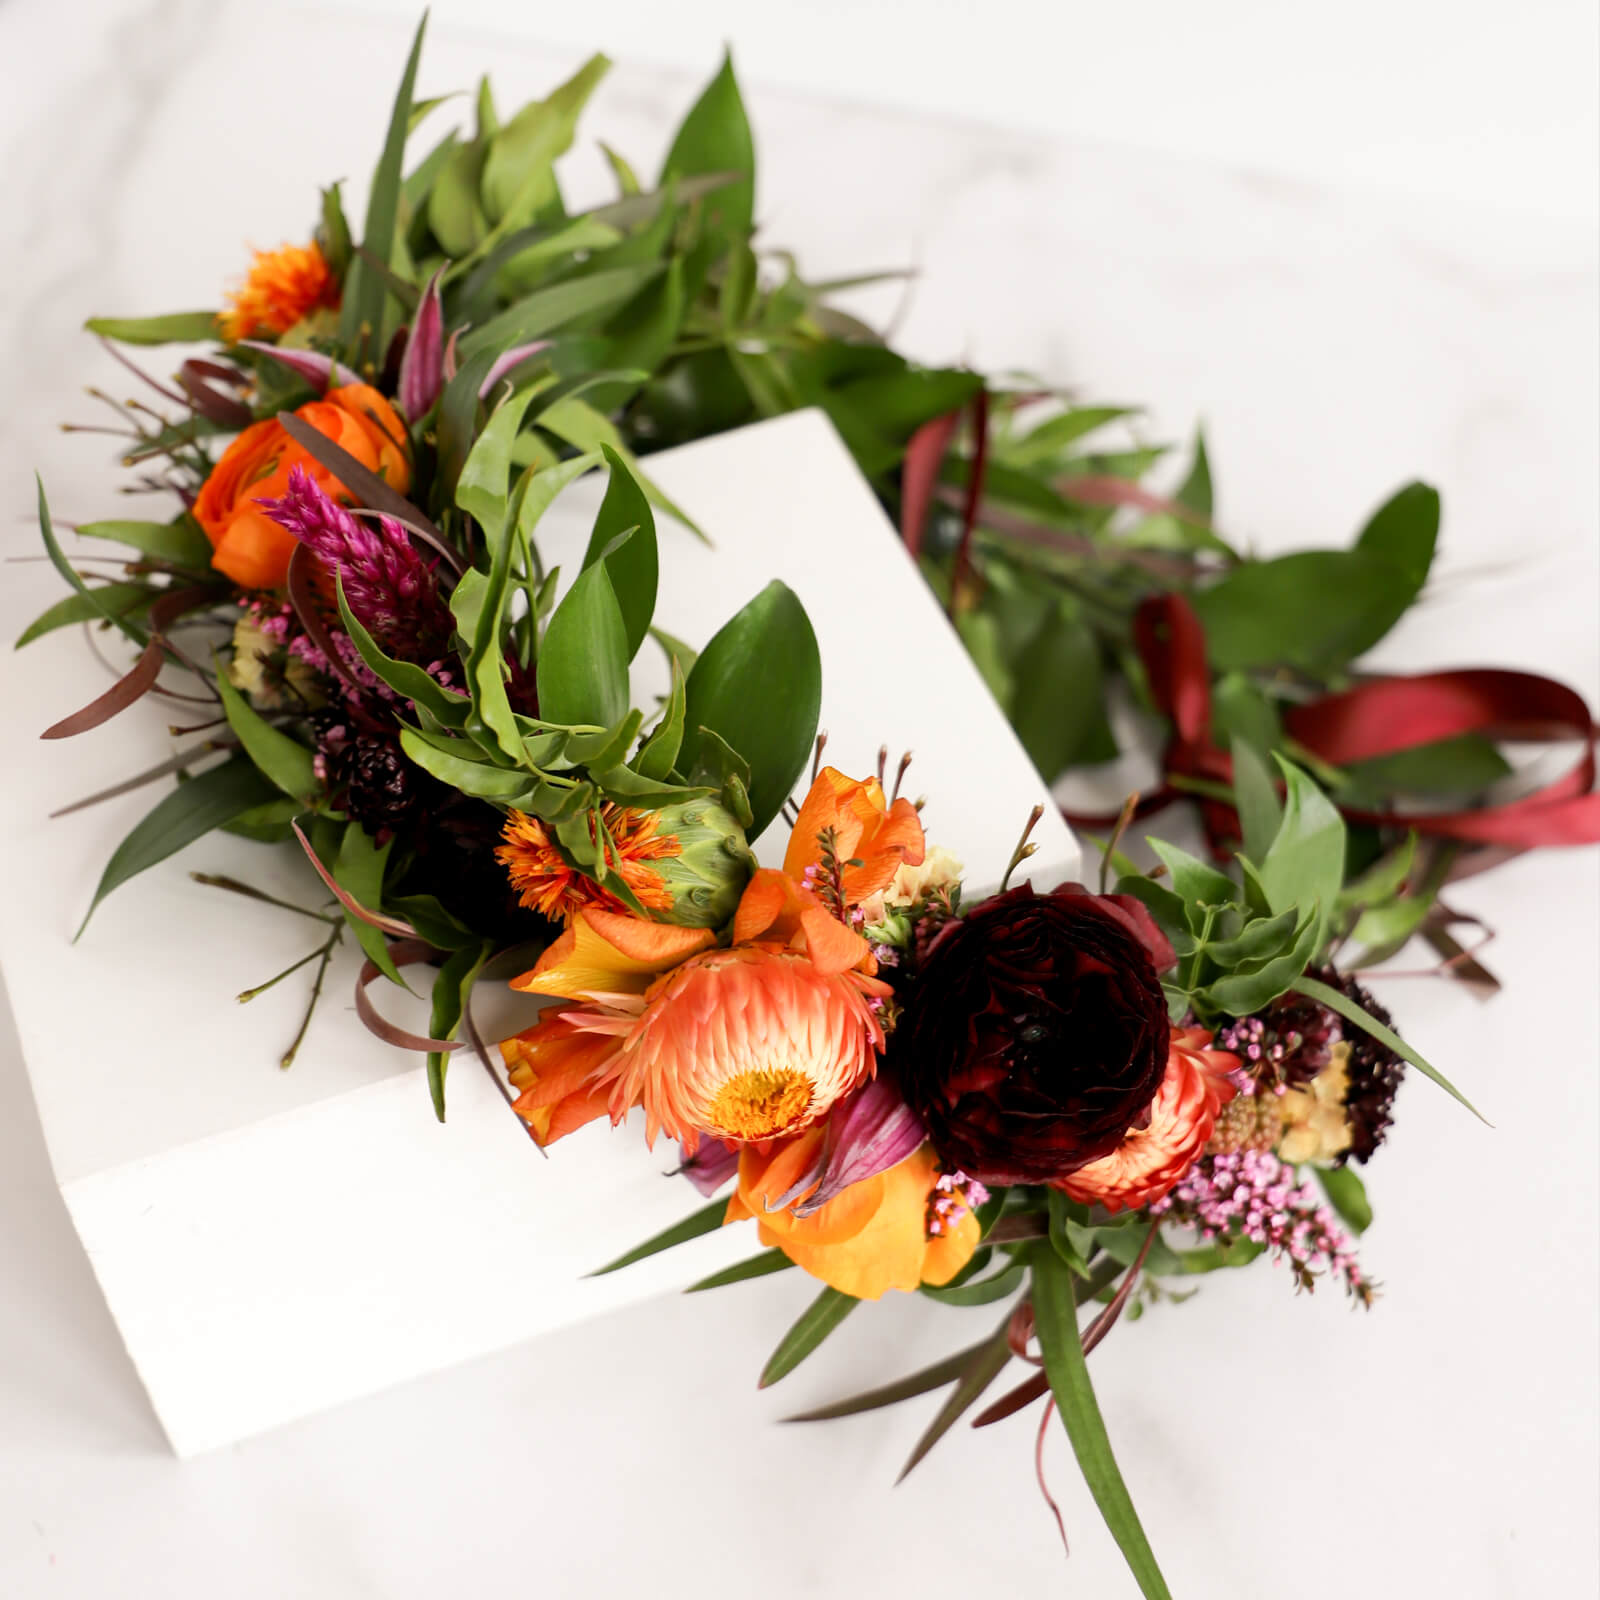 Pink, purple, orange and red flower crown with greenery